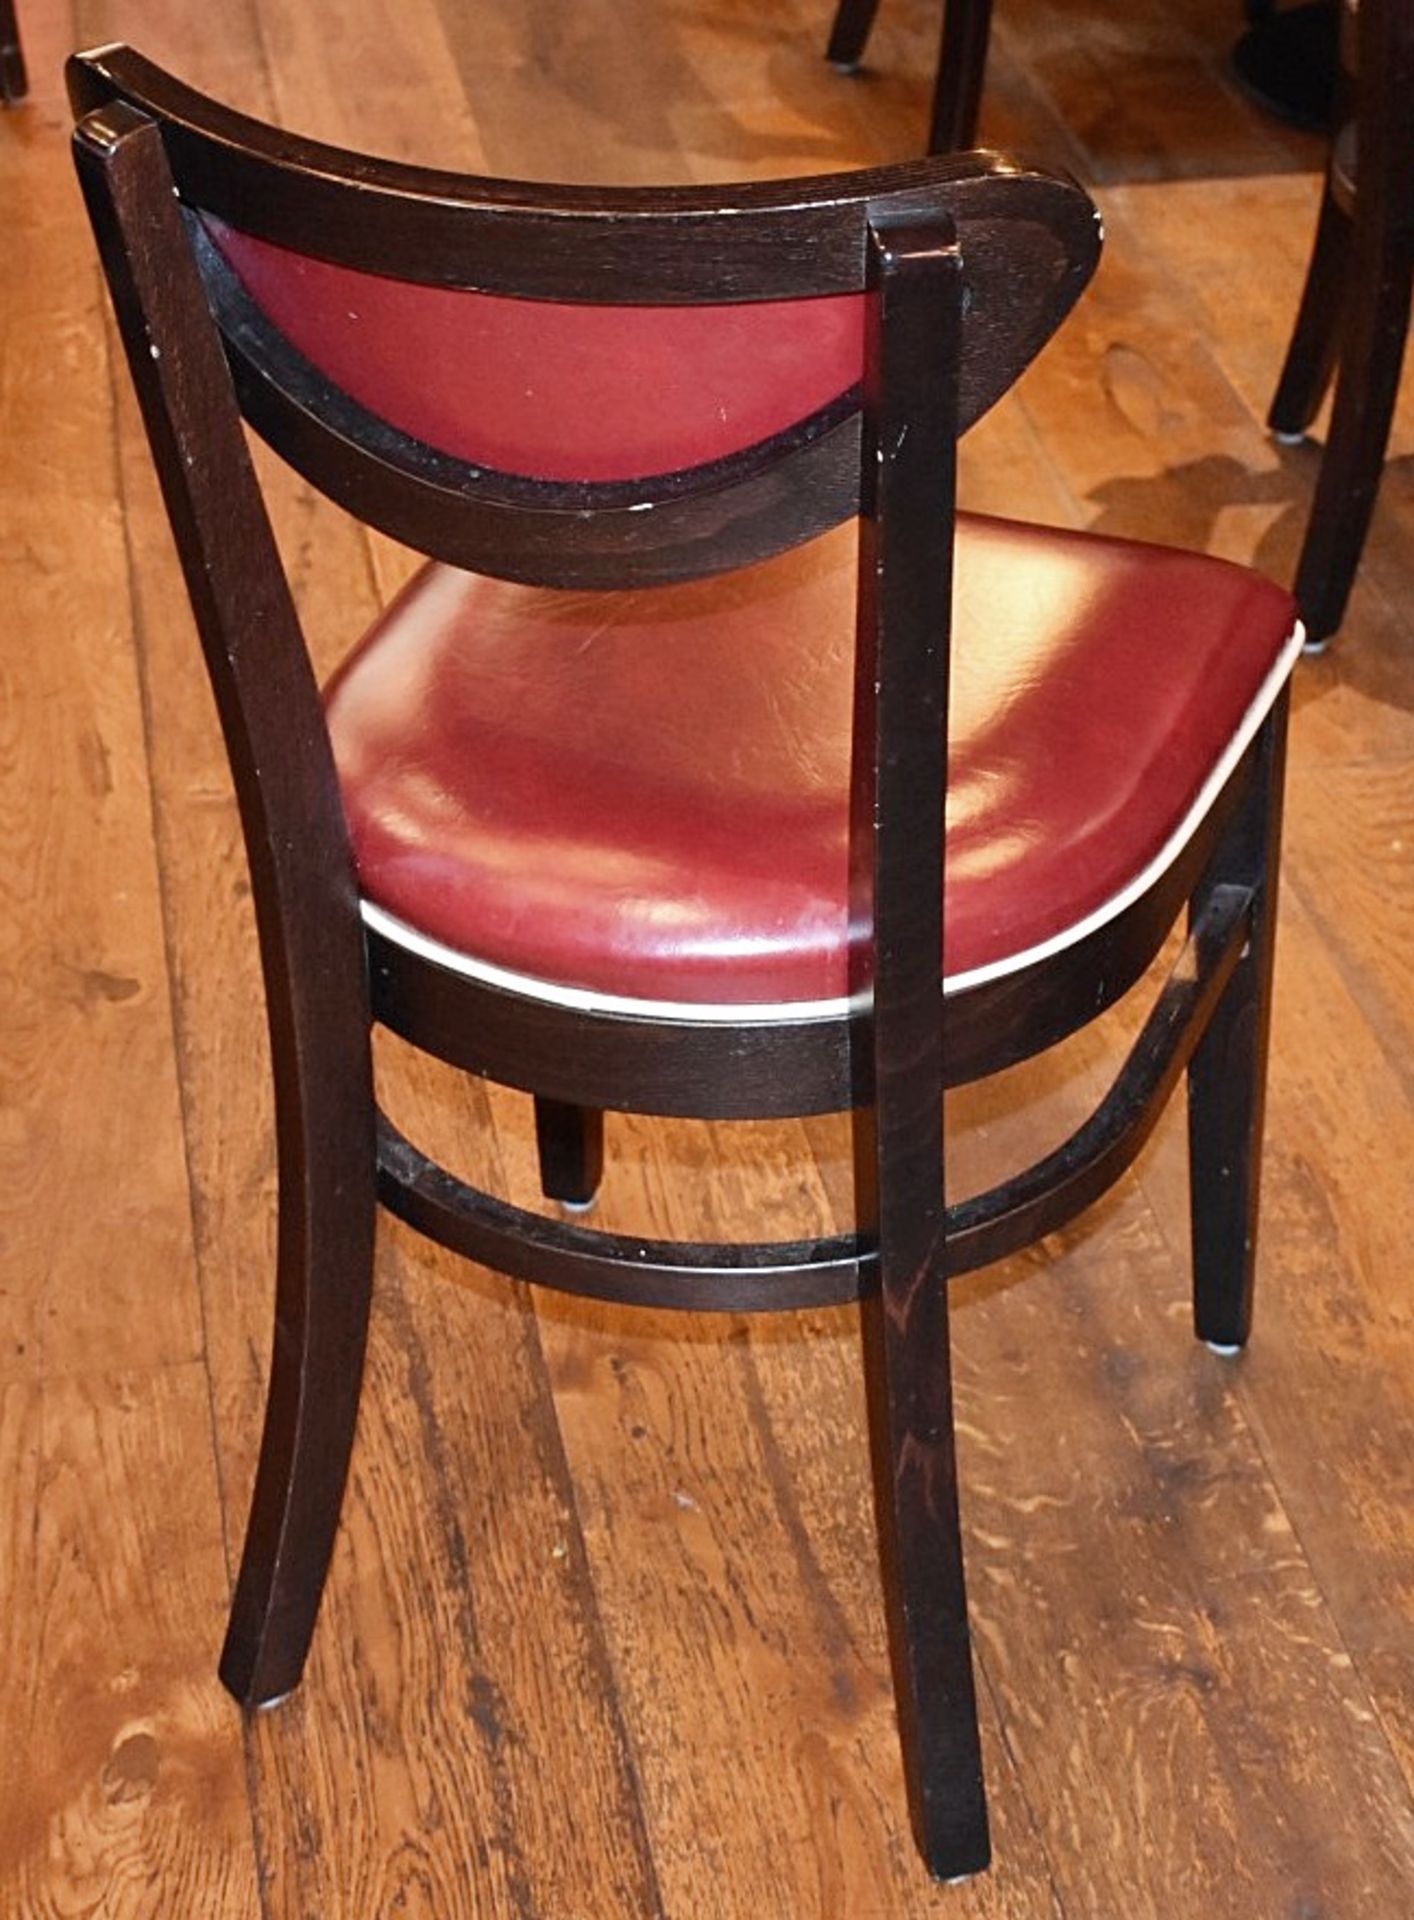 4 x Wine Red Faux Leather Dining Chairs From Italian American Restaurant - Retro Design With Dark - Image 4 of 4